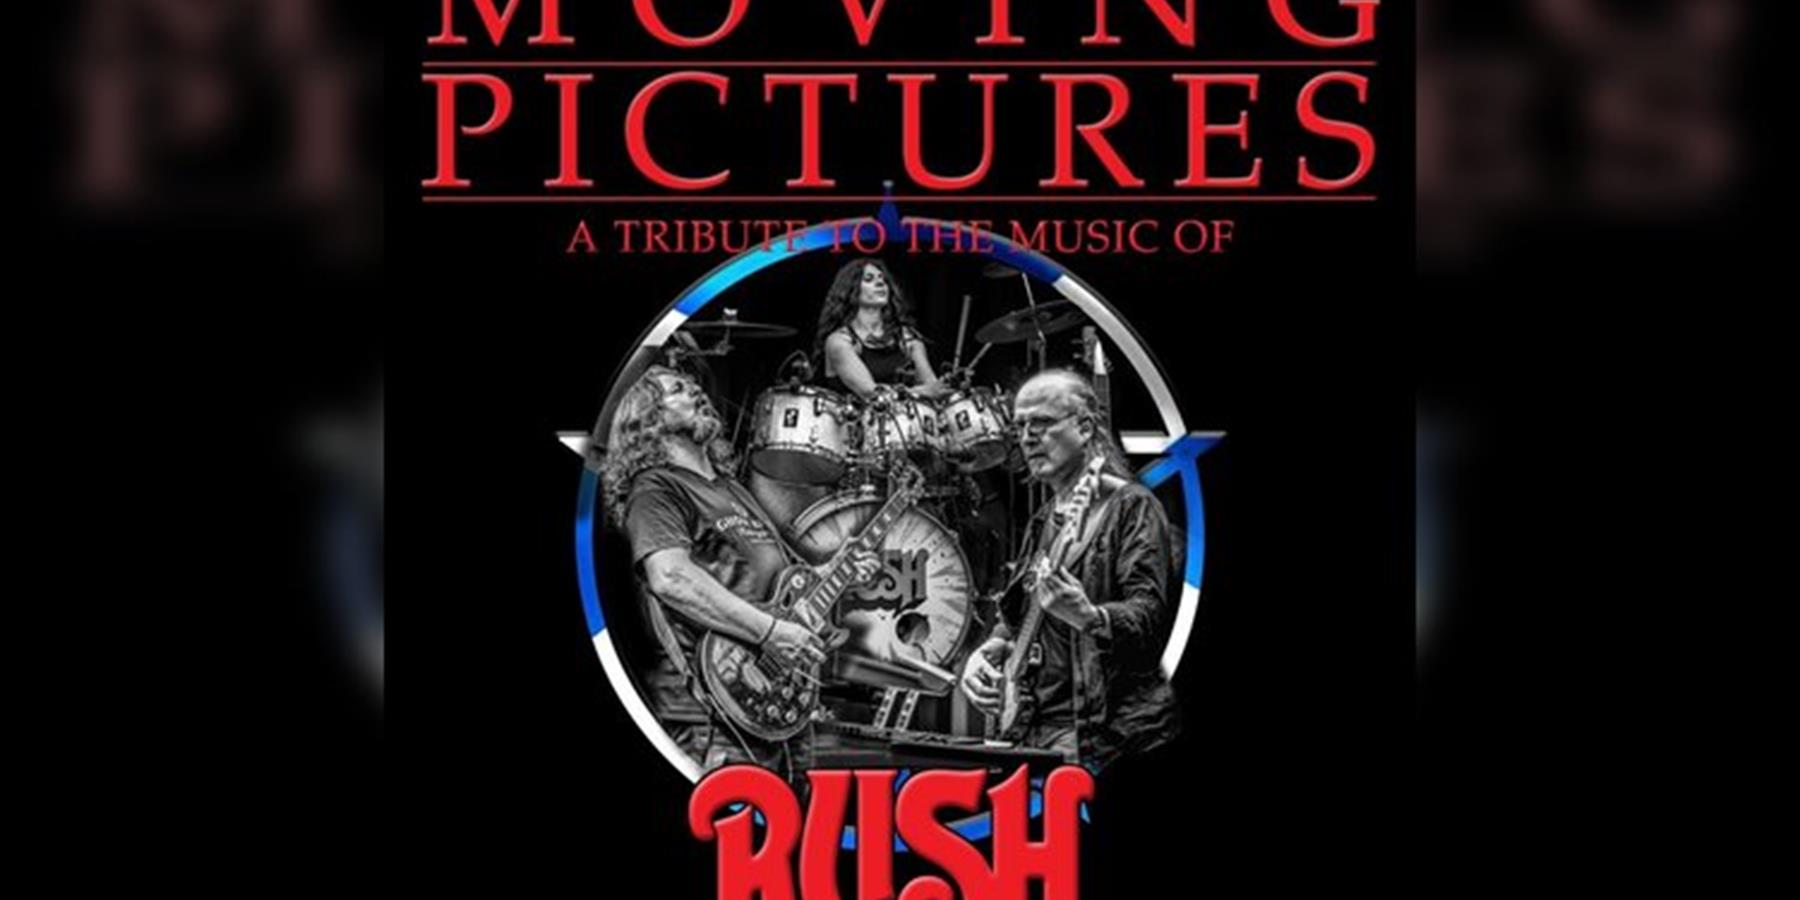 Moving Pictures - A Tribute To Rush